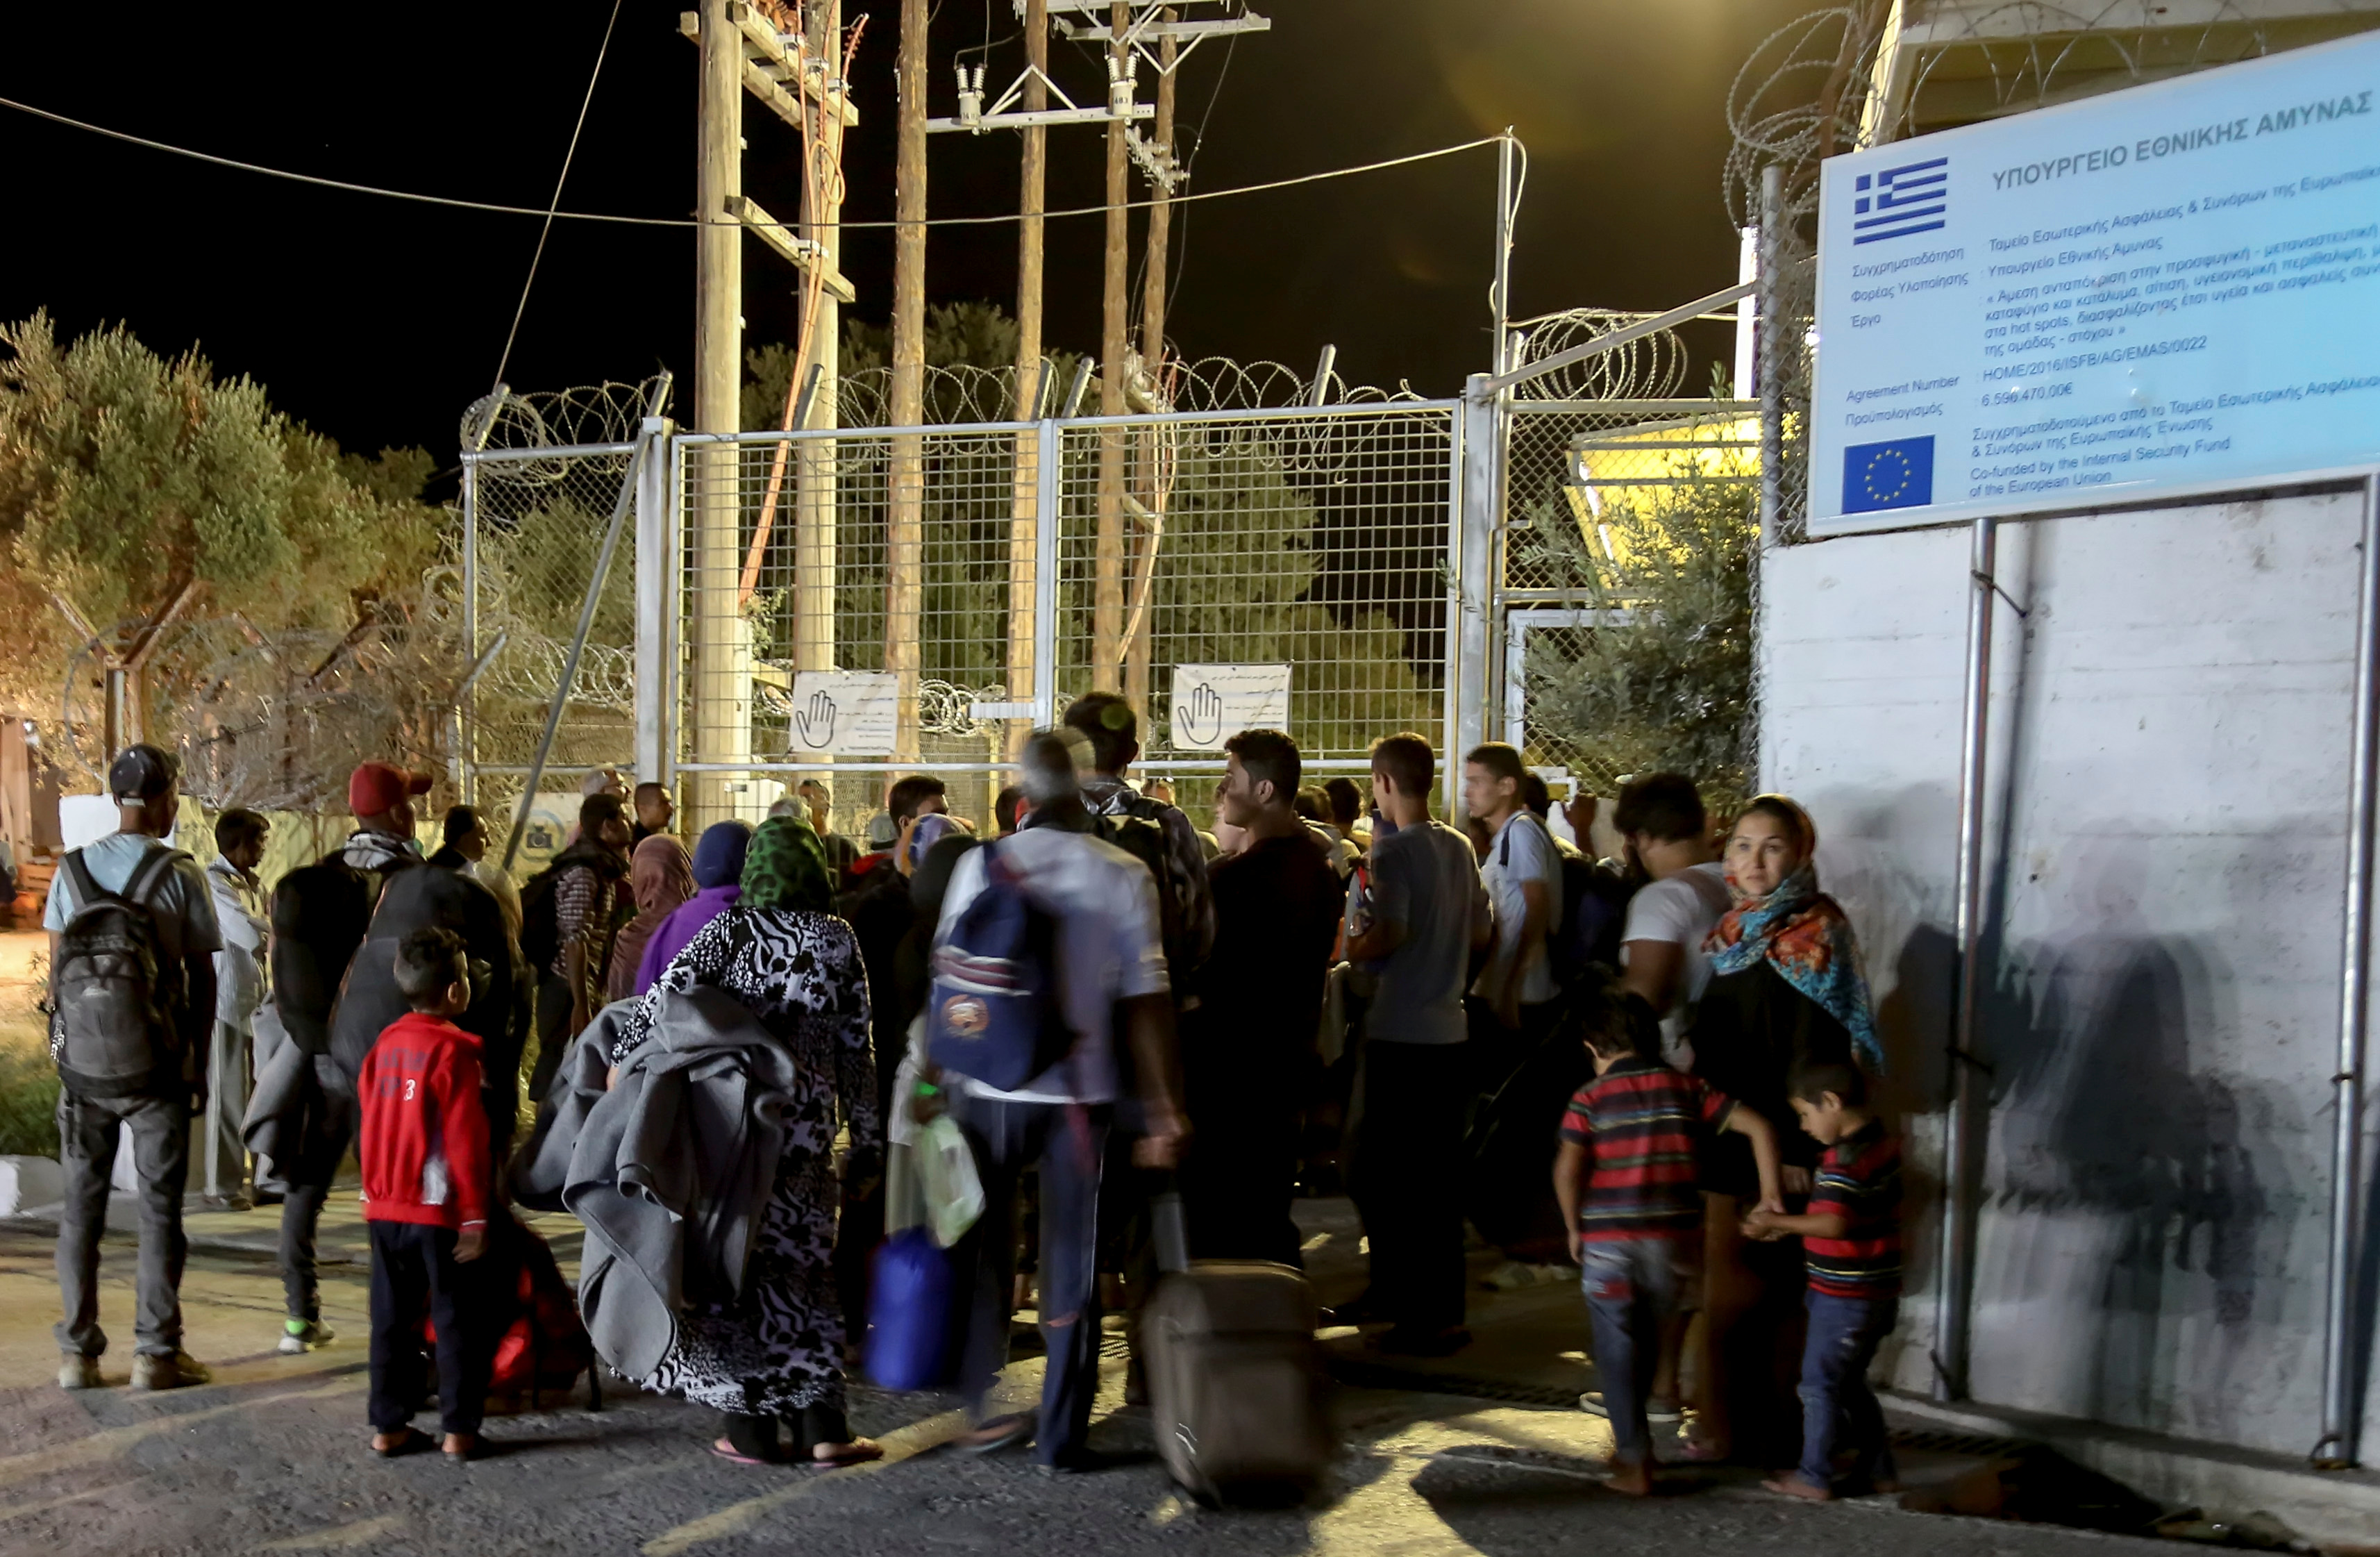 Refugees and migrants stand at the closed gate of the Moria migrant camp, after a fire at the facility, on the island of Lesbos